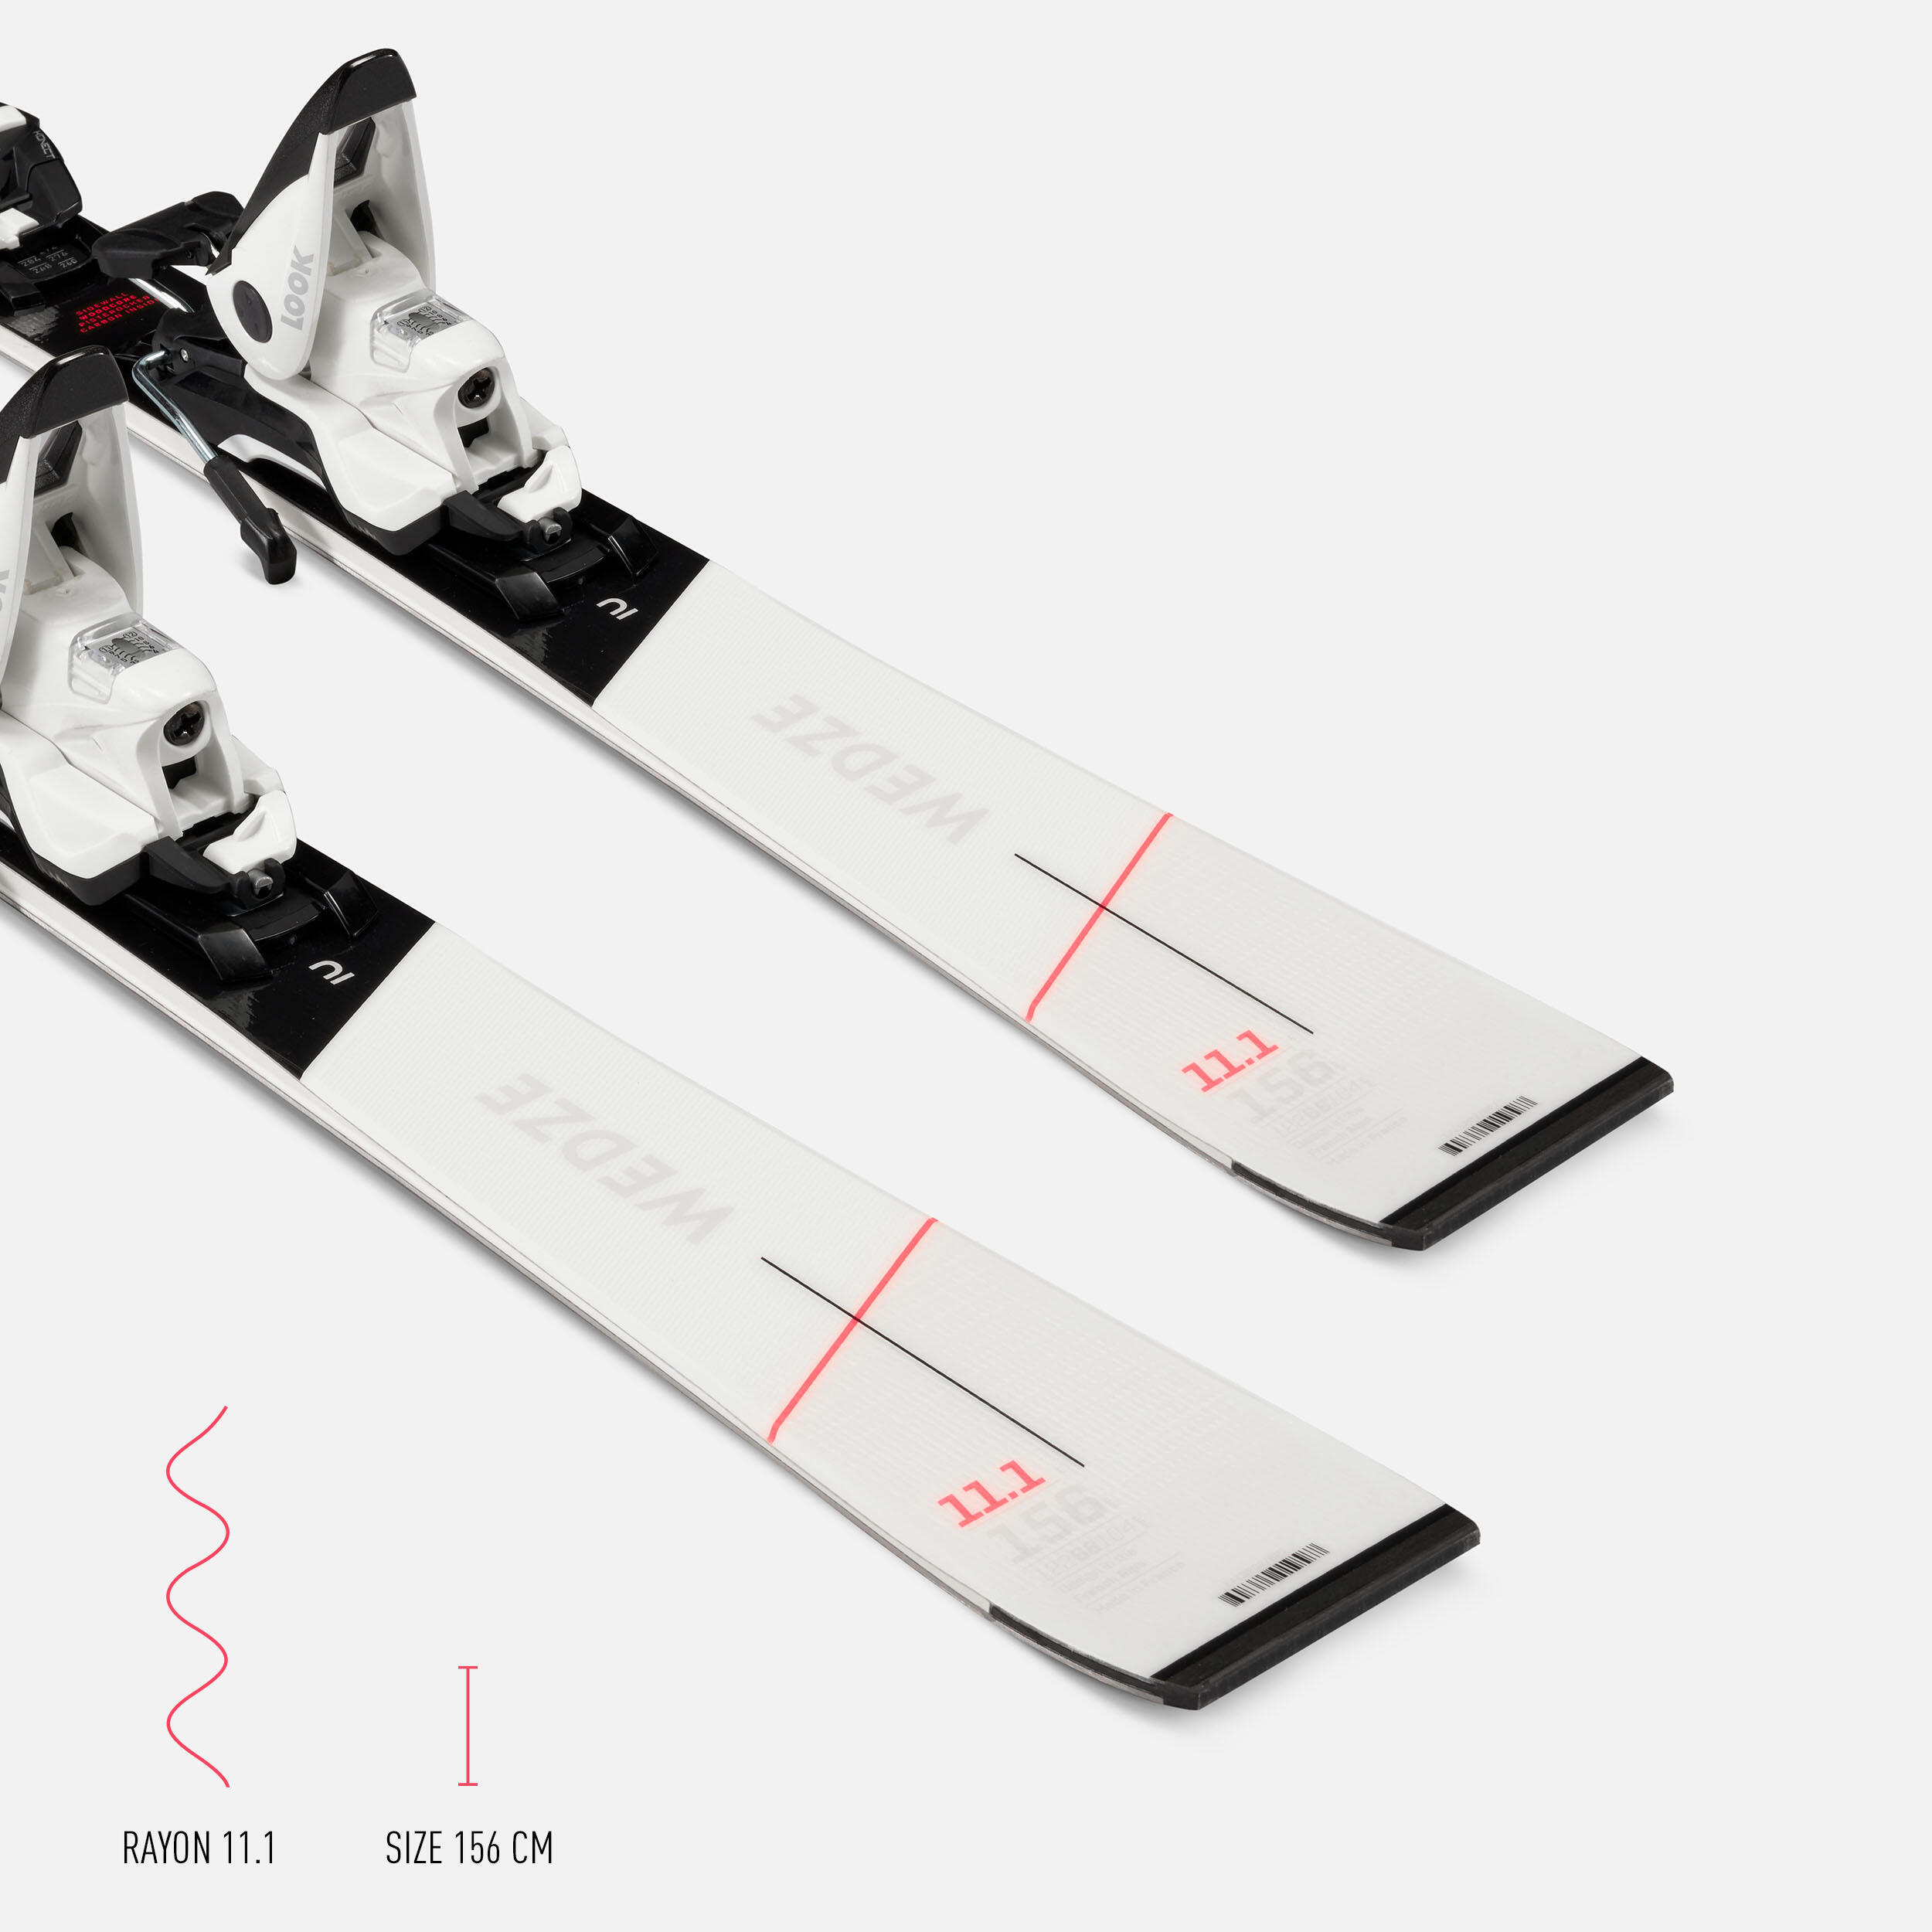 WOMEN’S ALPINE SKIS WITH BINDING - BOOST 900 R 22/23